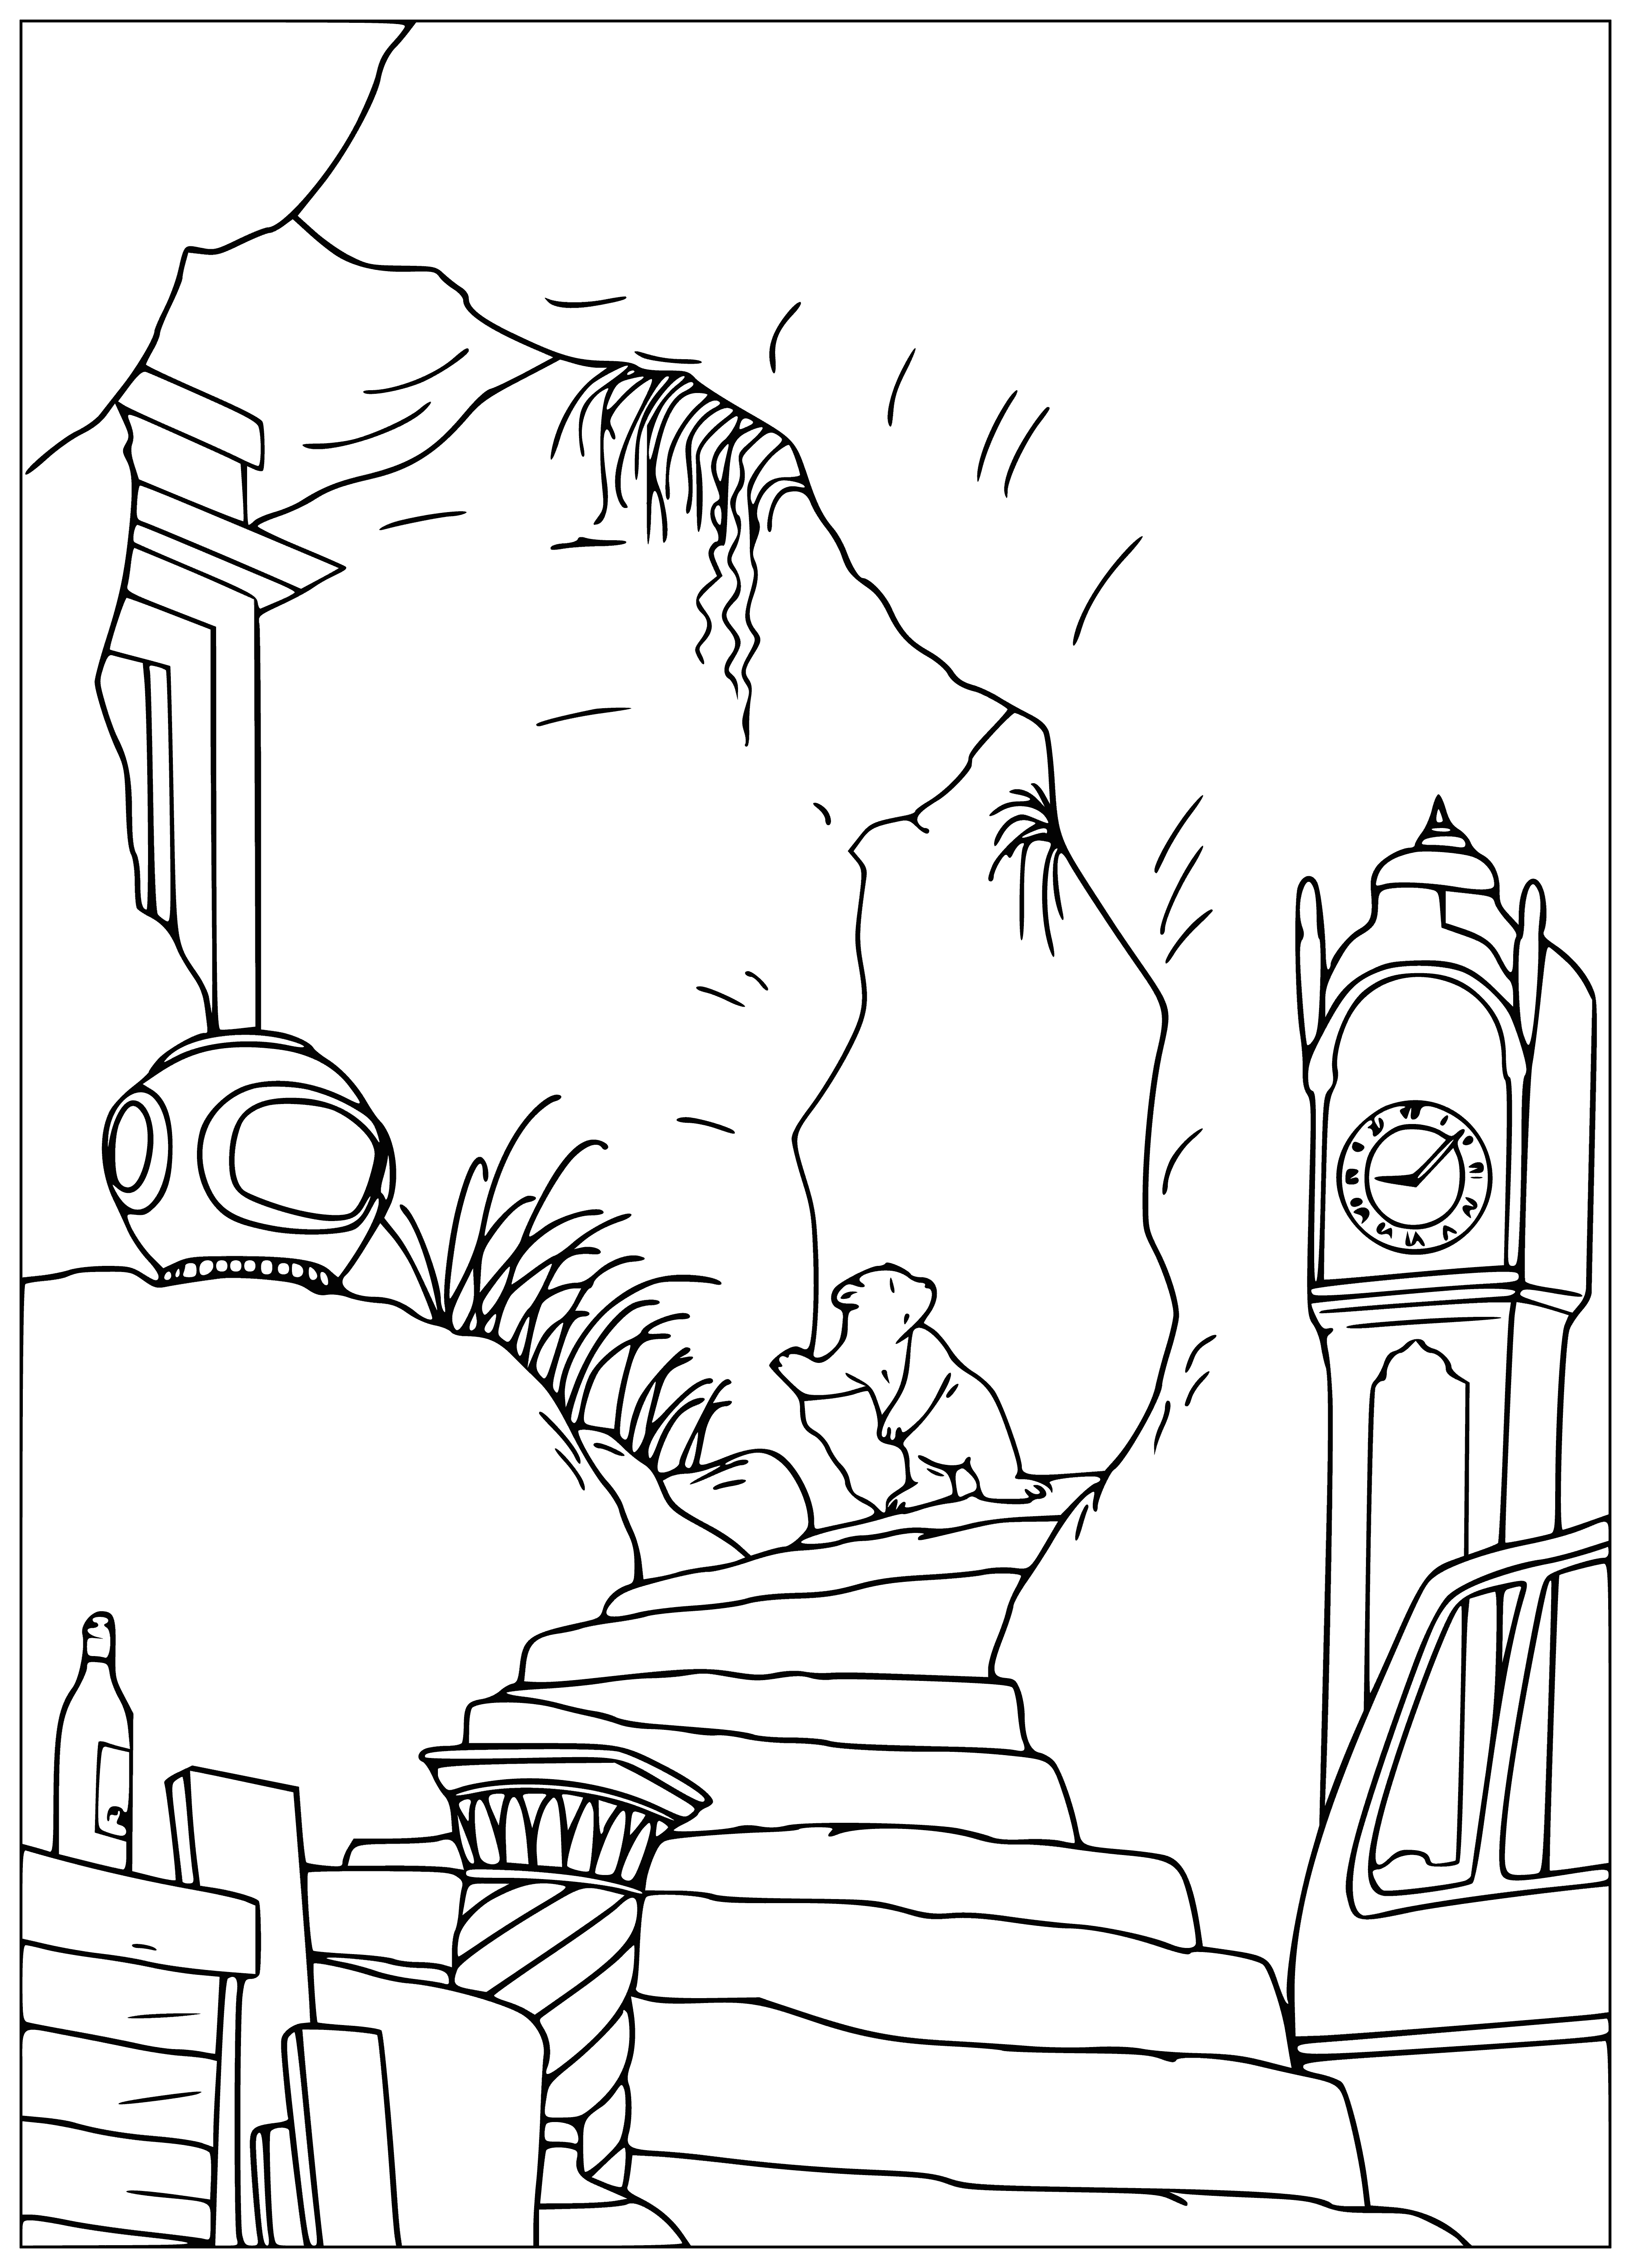 coloring page: Little polar bear stands in dark cave looking up at sky where a small hole lets sunshine in. #polarbear #cave #sunshine